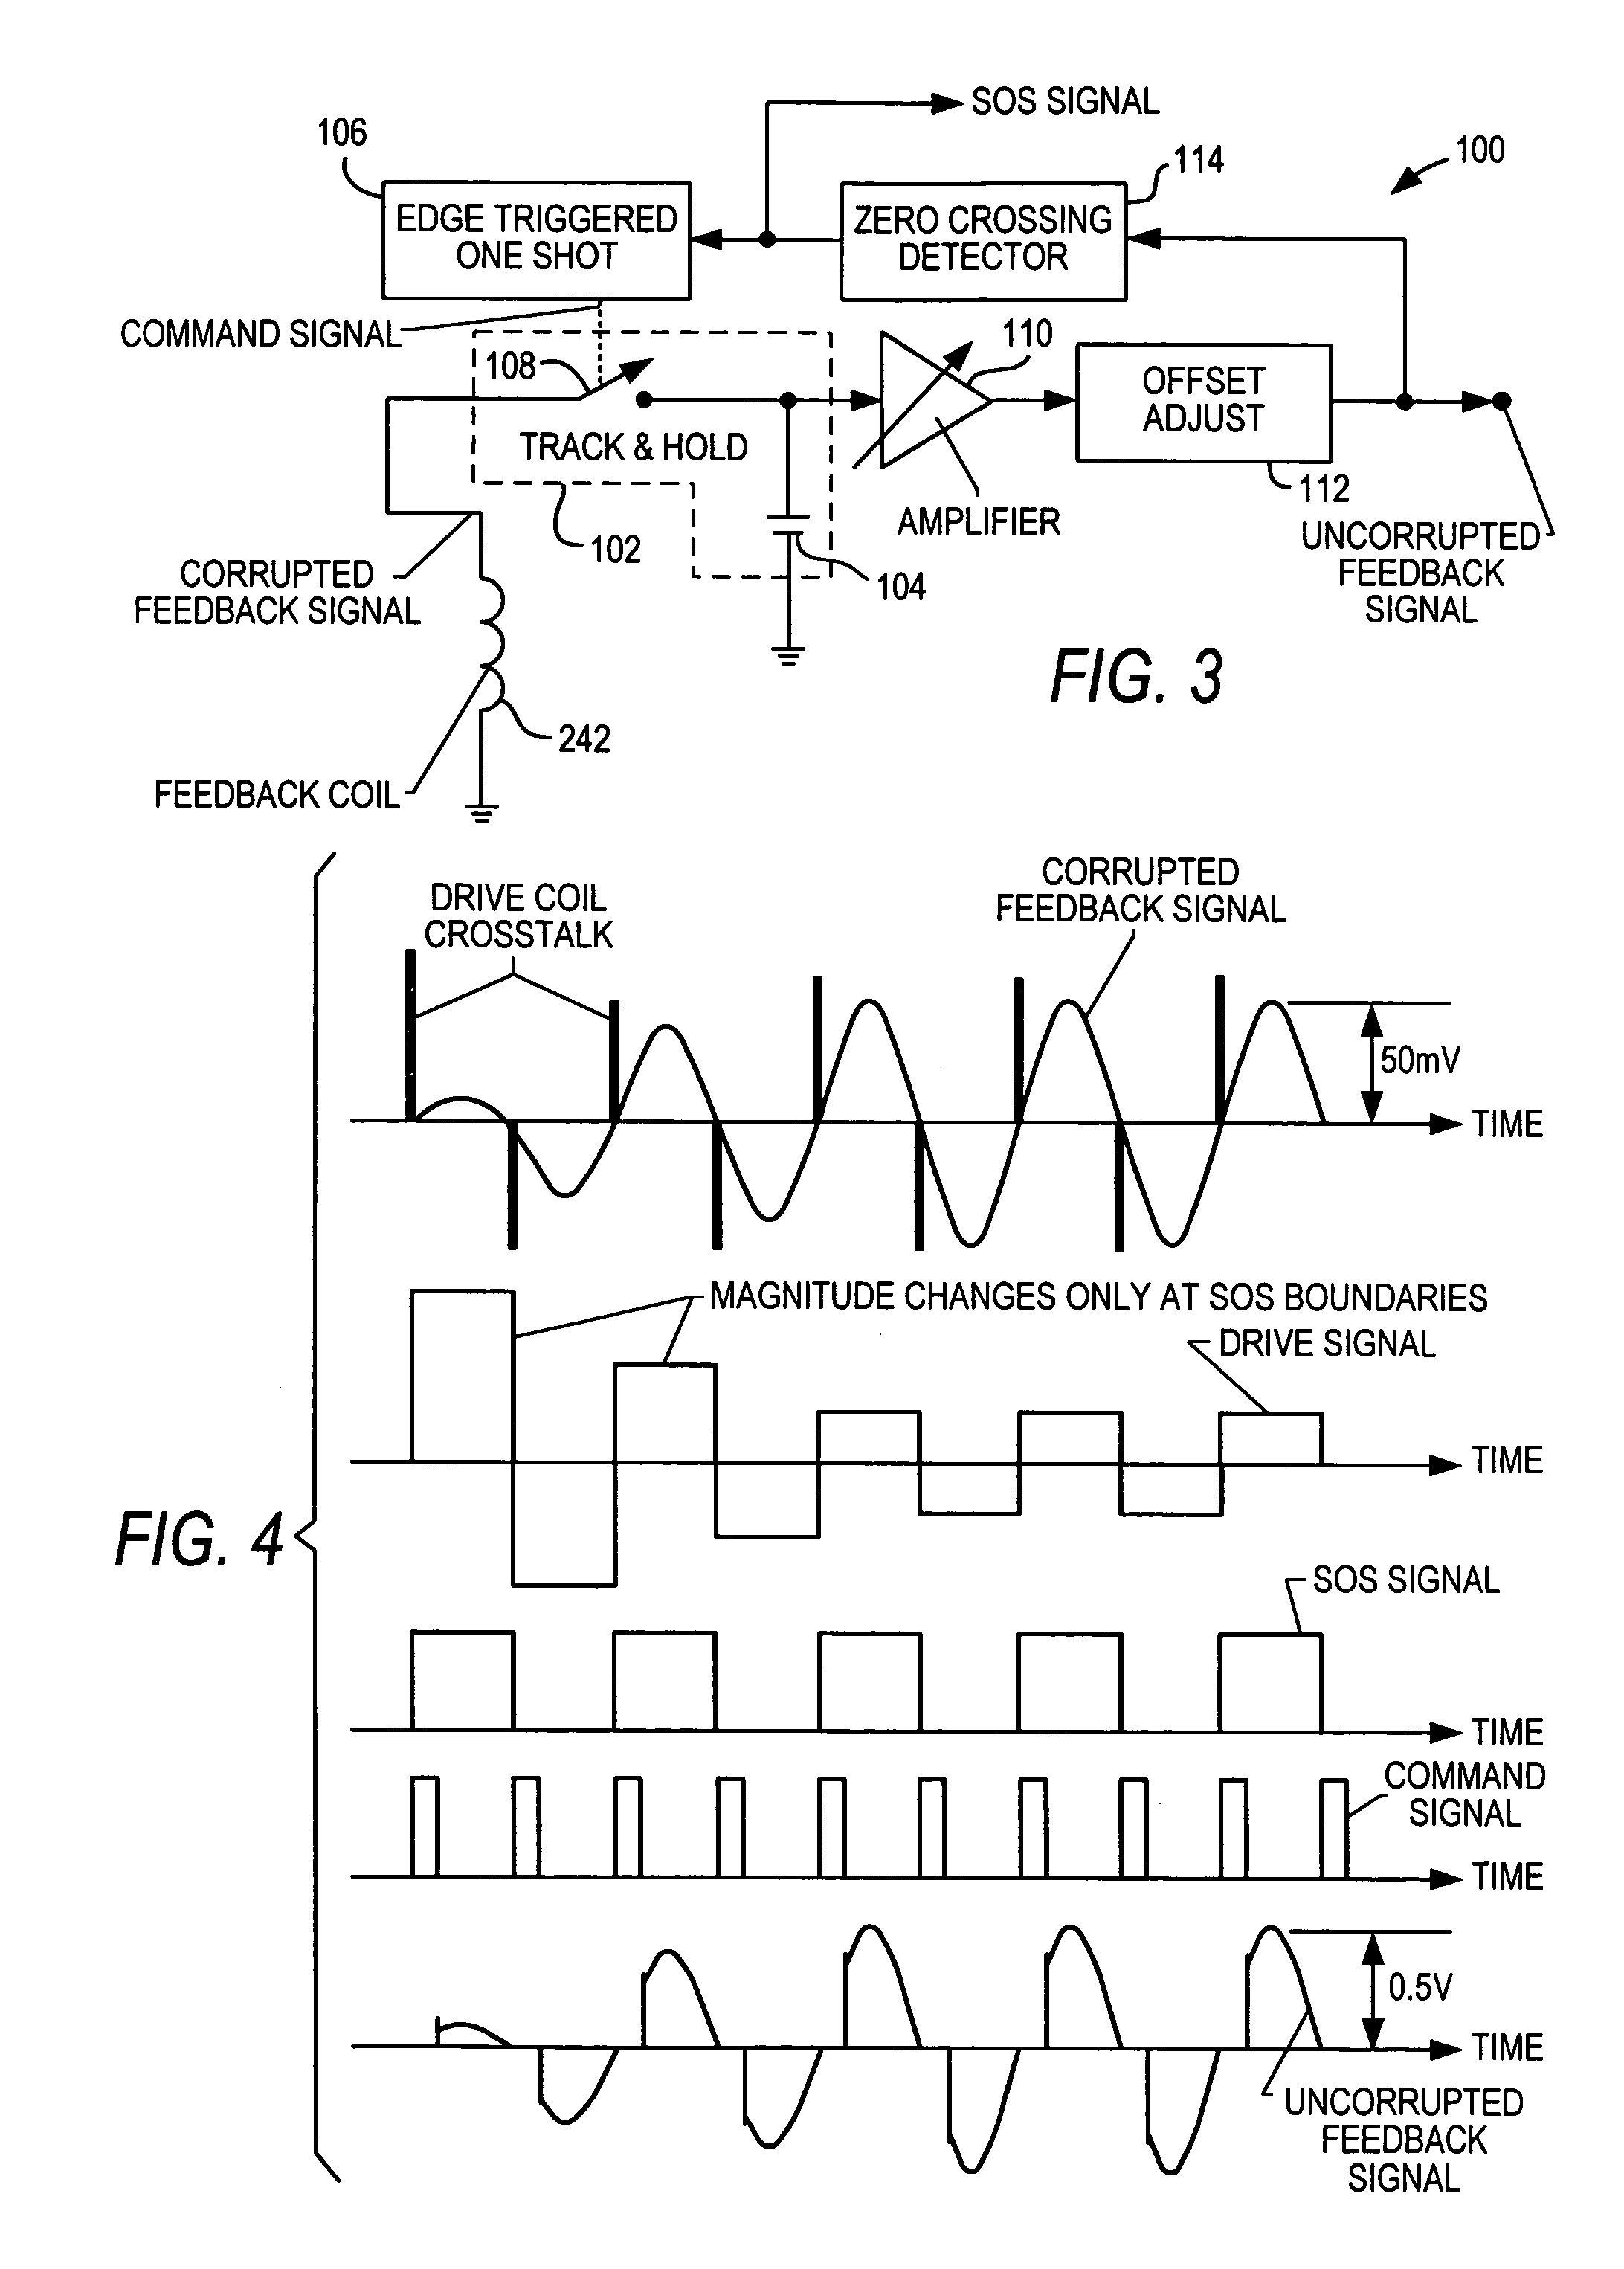 Motor drive circuit with reduced coil crosstalk in a feedback signal indicative of mirror motion in light scanning arrangements